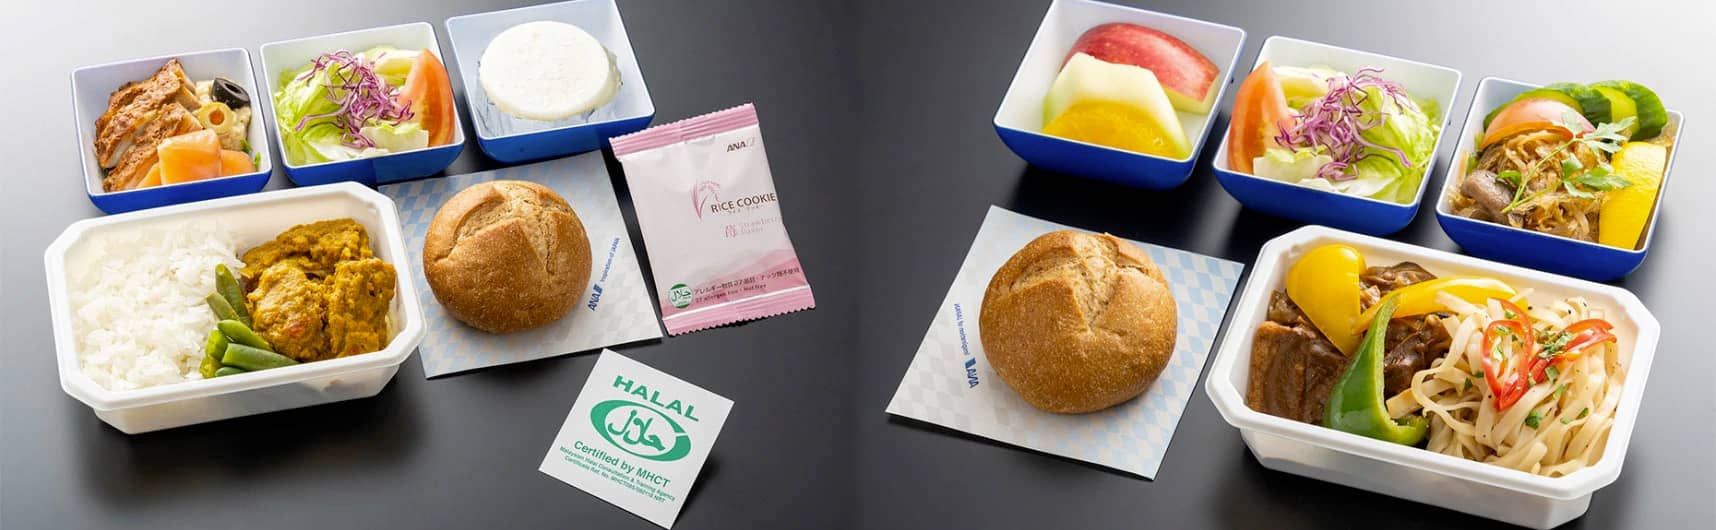 ANA’s delicious in-flight meals, served at sea level